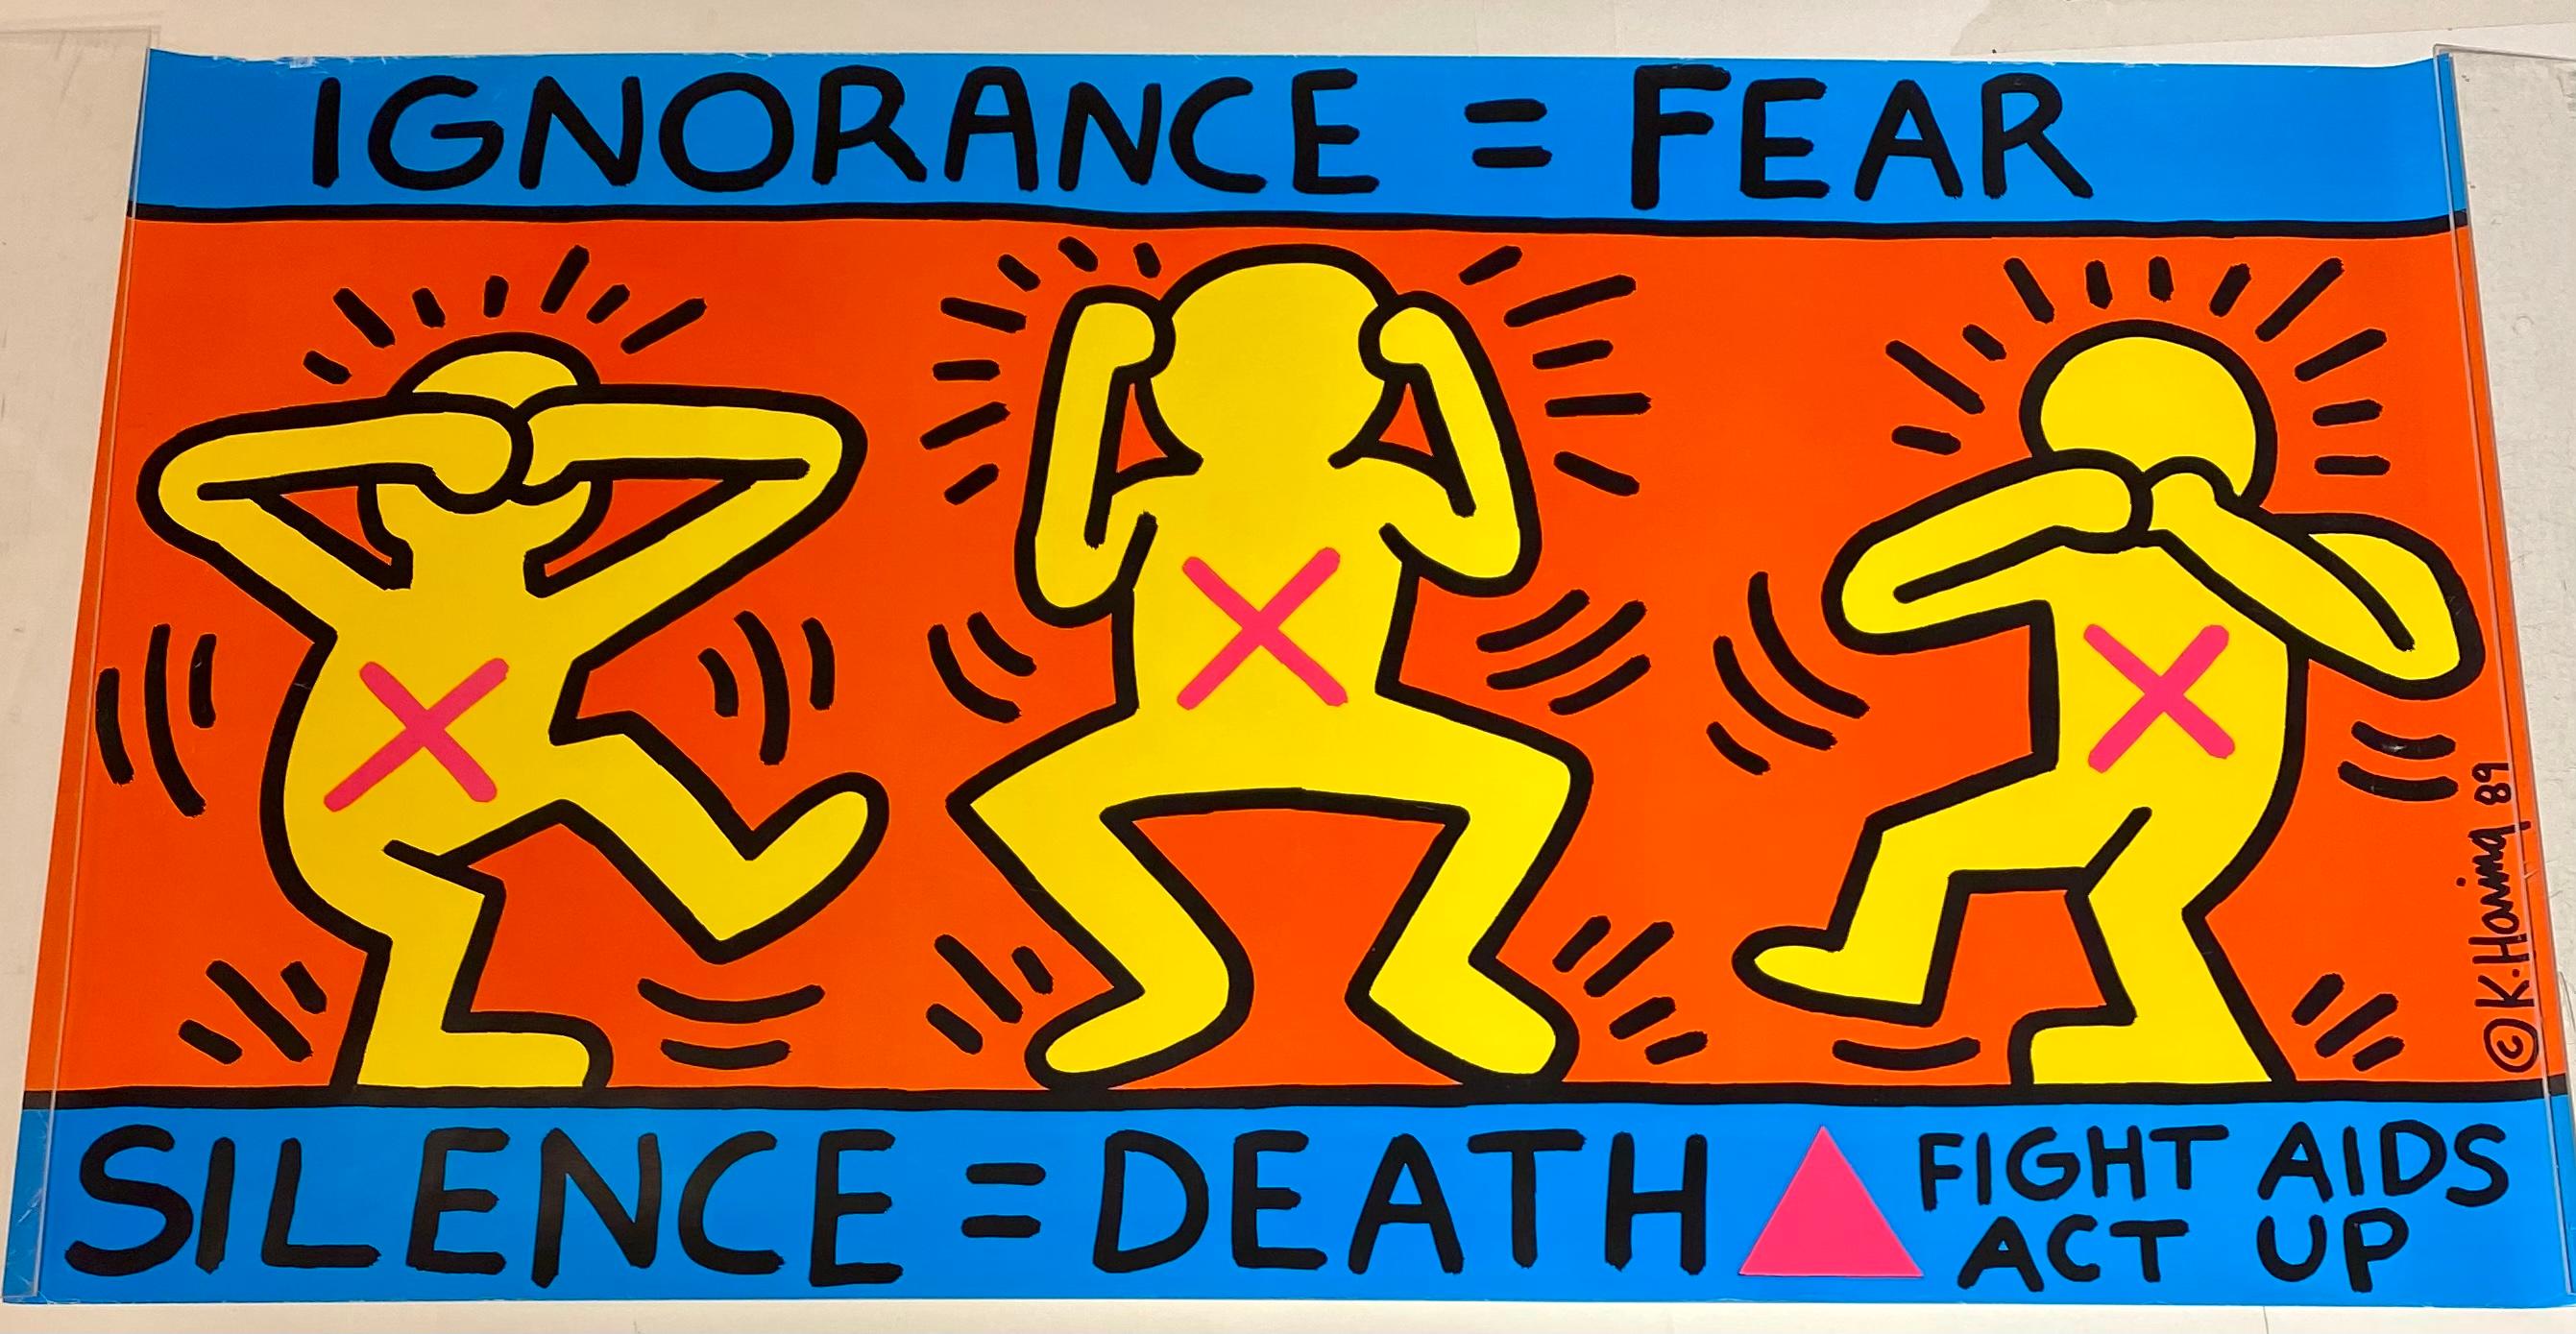 Keith Haring Ignorance = Fear, 1989 (Keith Haring Act Up poster) 1